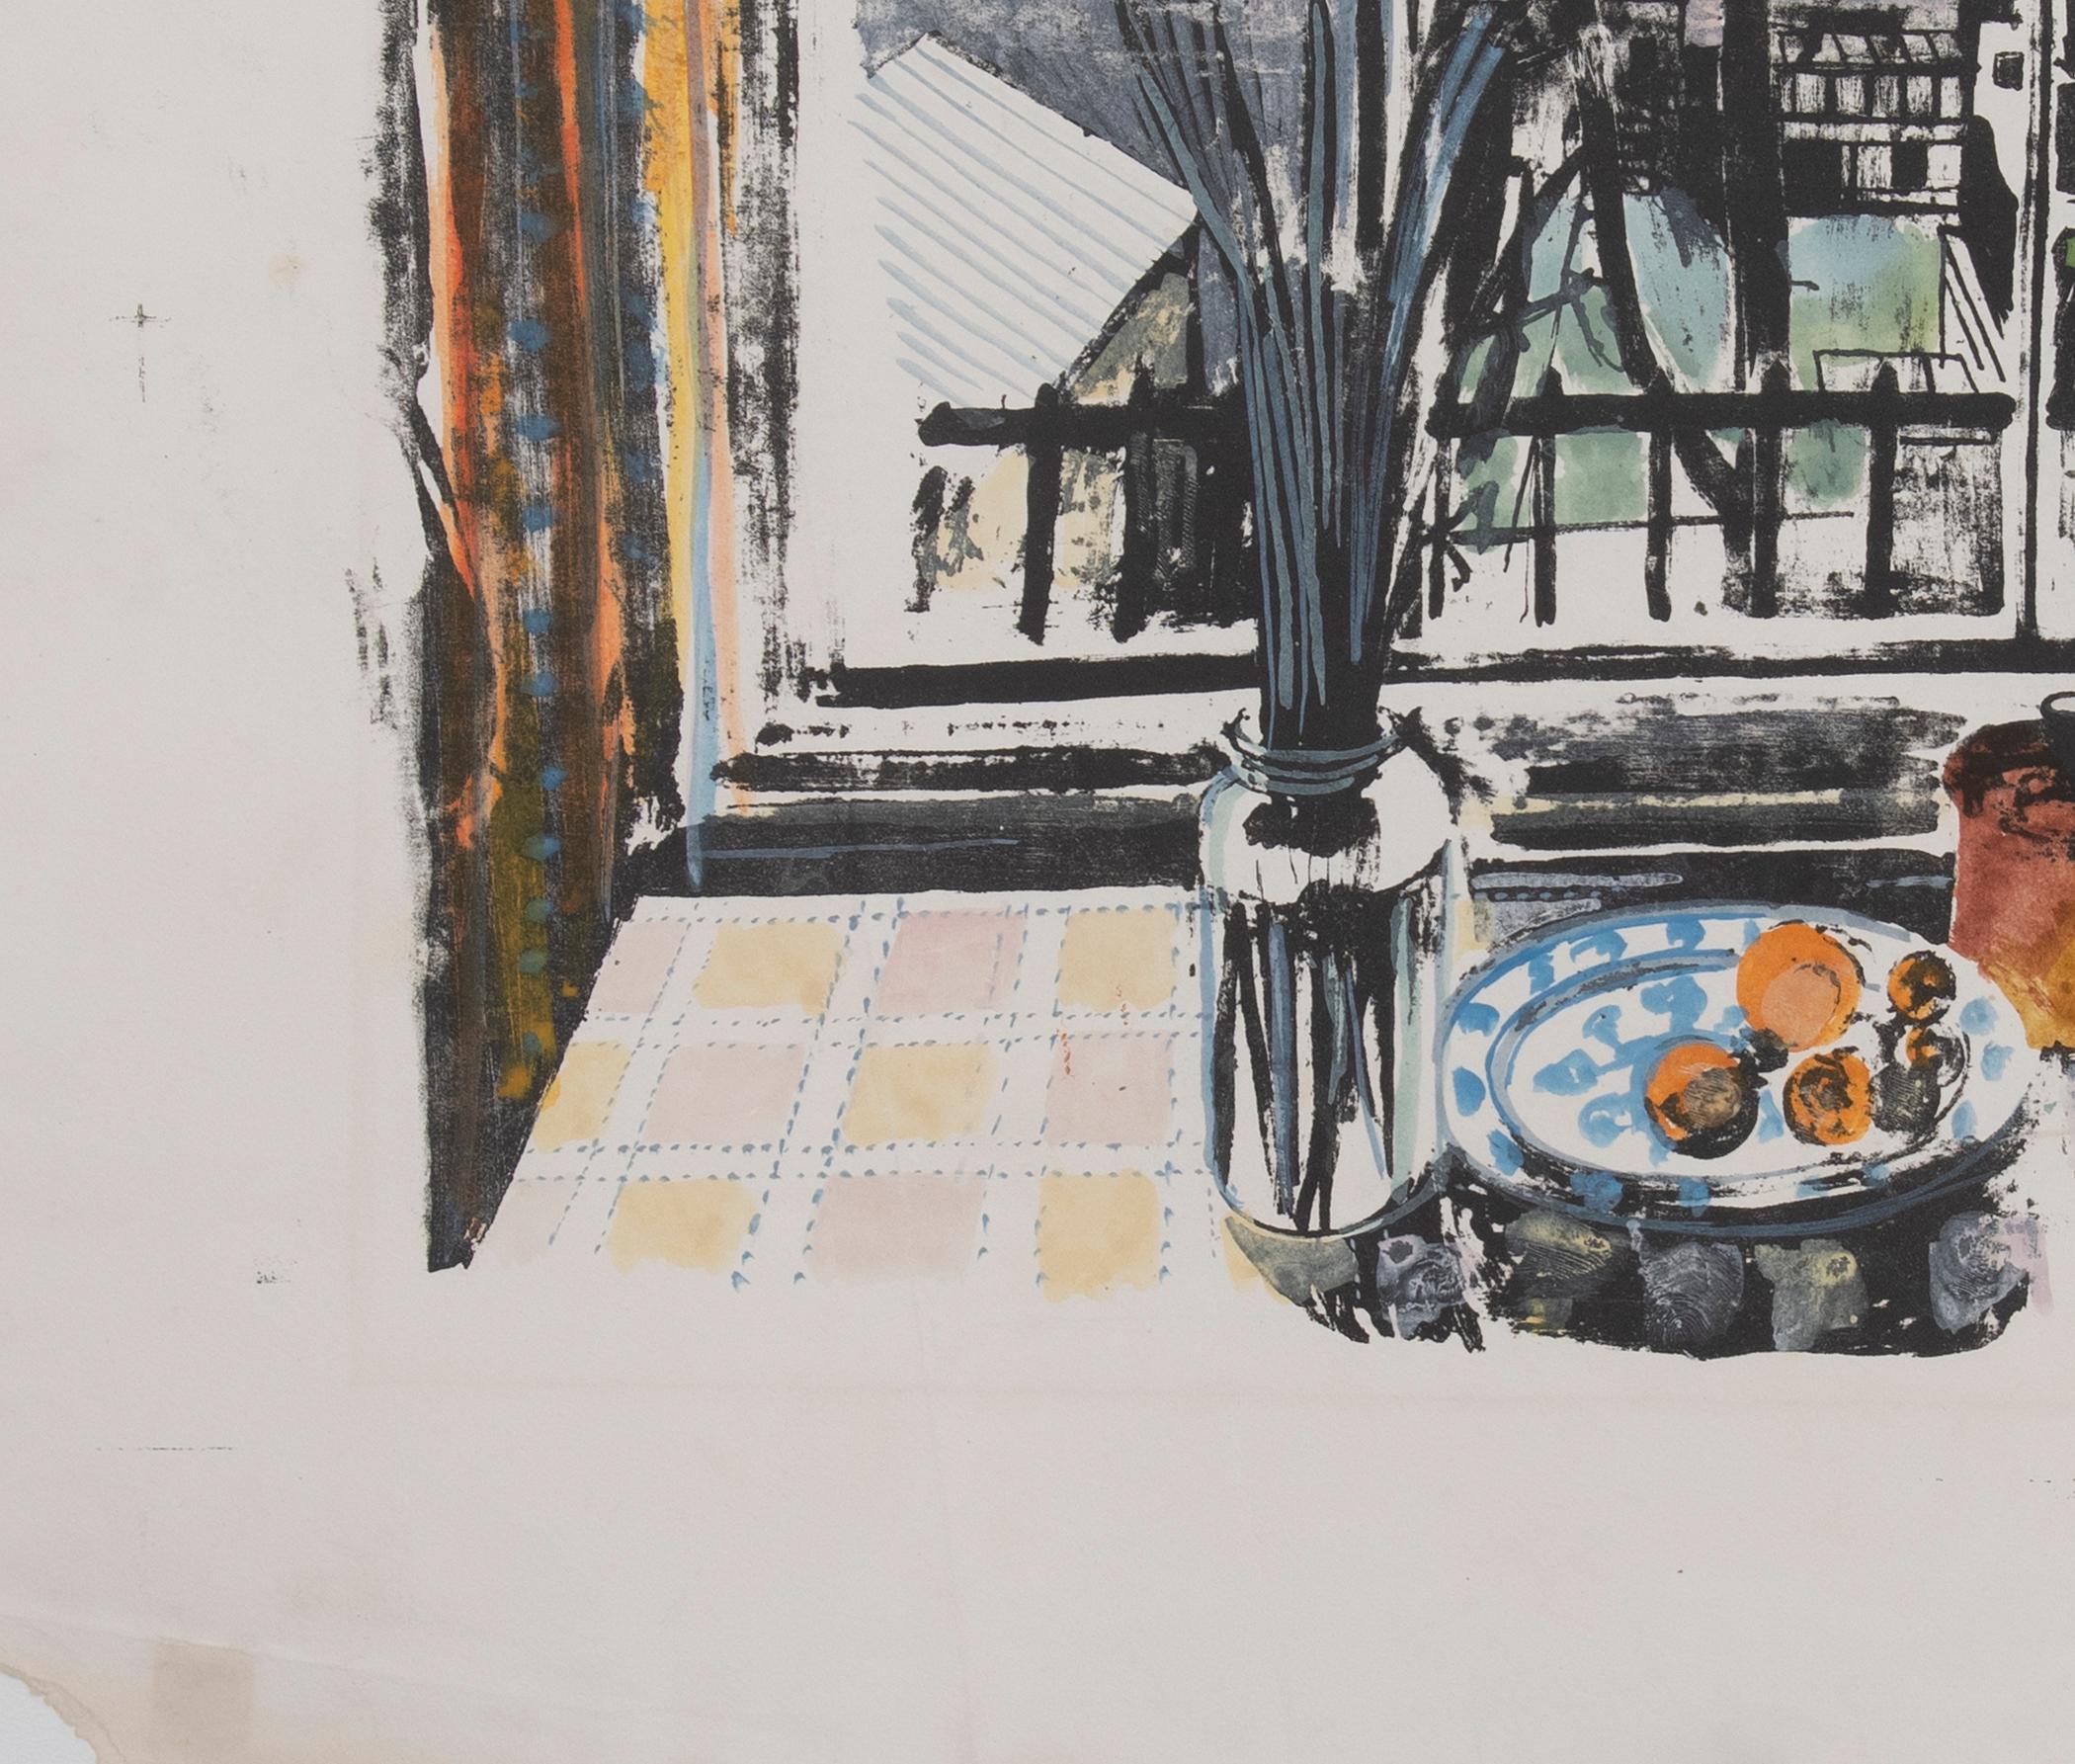 ’Untitled’

By Richard Bawden
Medium - Watercolour
Signed - Yes
Size - 540mm x 500
Date - Unknown
Condition - Fair 8 out of 10

Painter and printmaker, born in Braintree, Essex, the son of Edward and Charlotte Bawden. He studied firstly at Chelsea